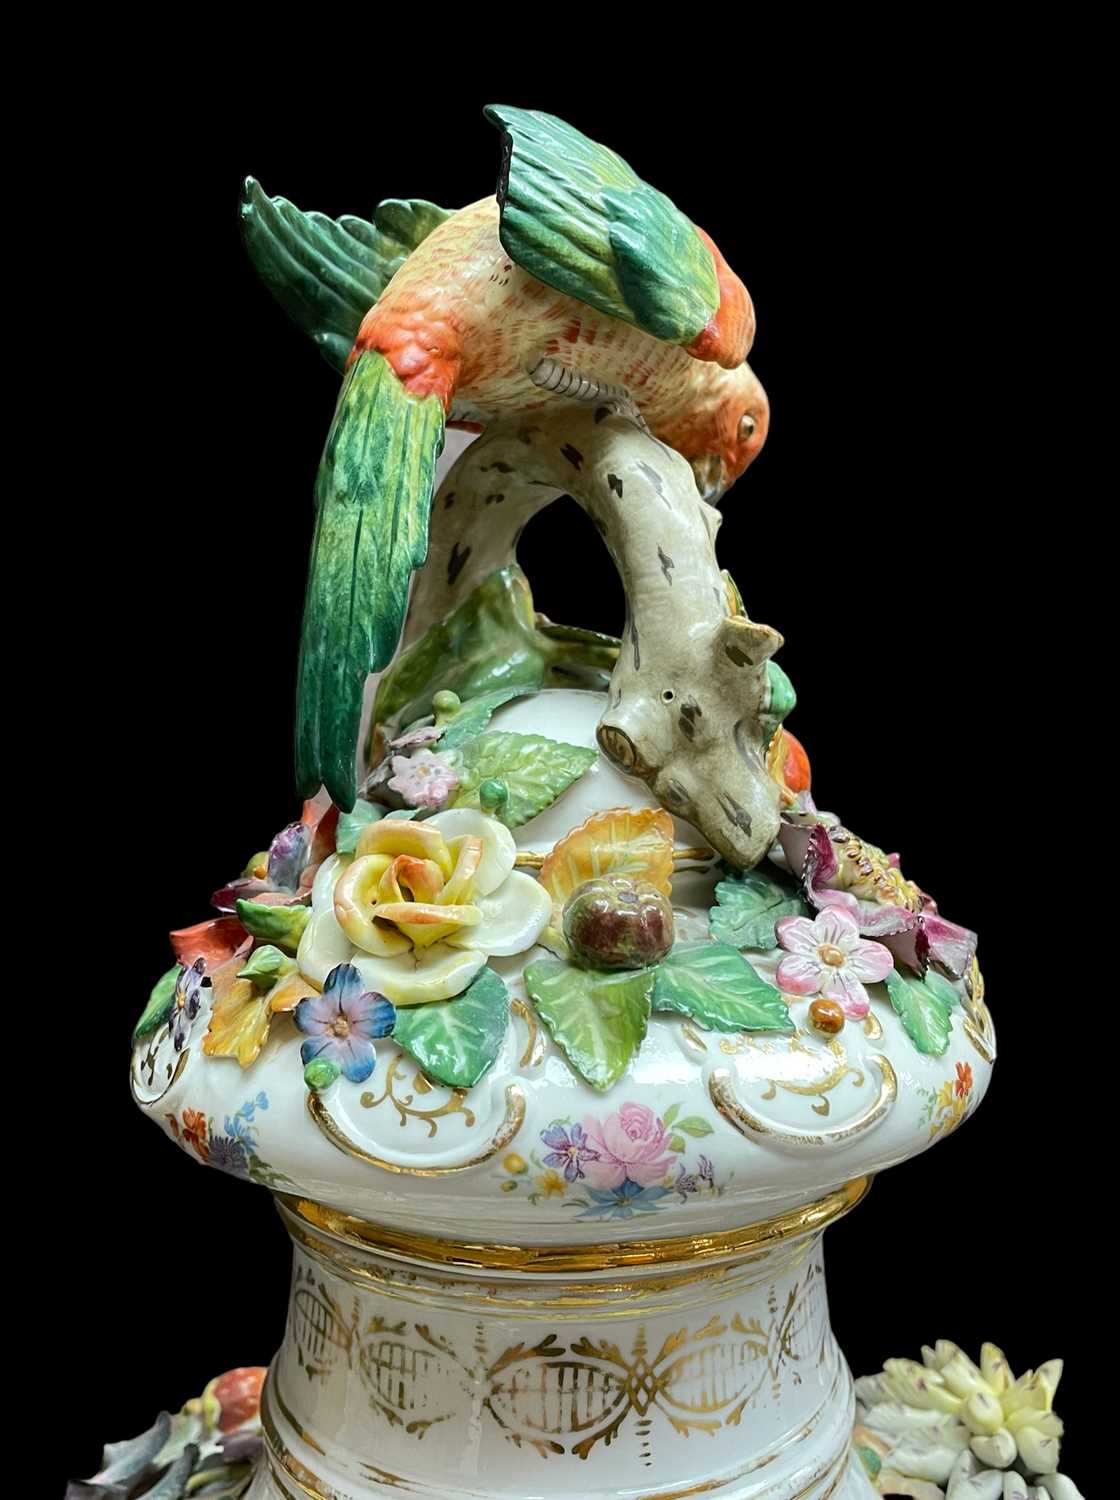 LARGE SITZENDORF PORCELAIN VASE, COVER & STAND, 19th Century, printed with vignettes of flowers - Image 7 of 8